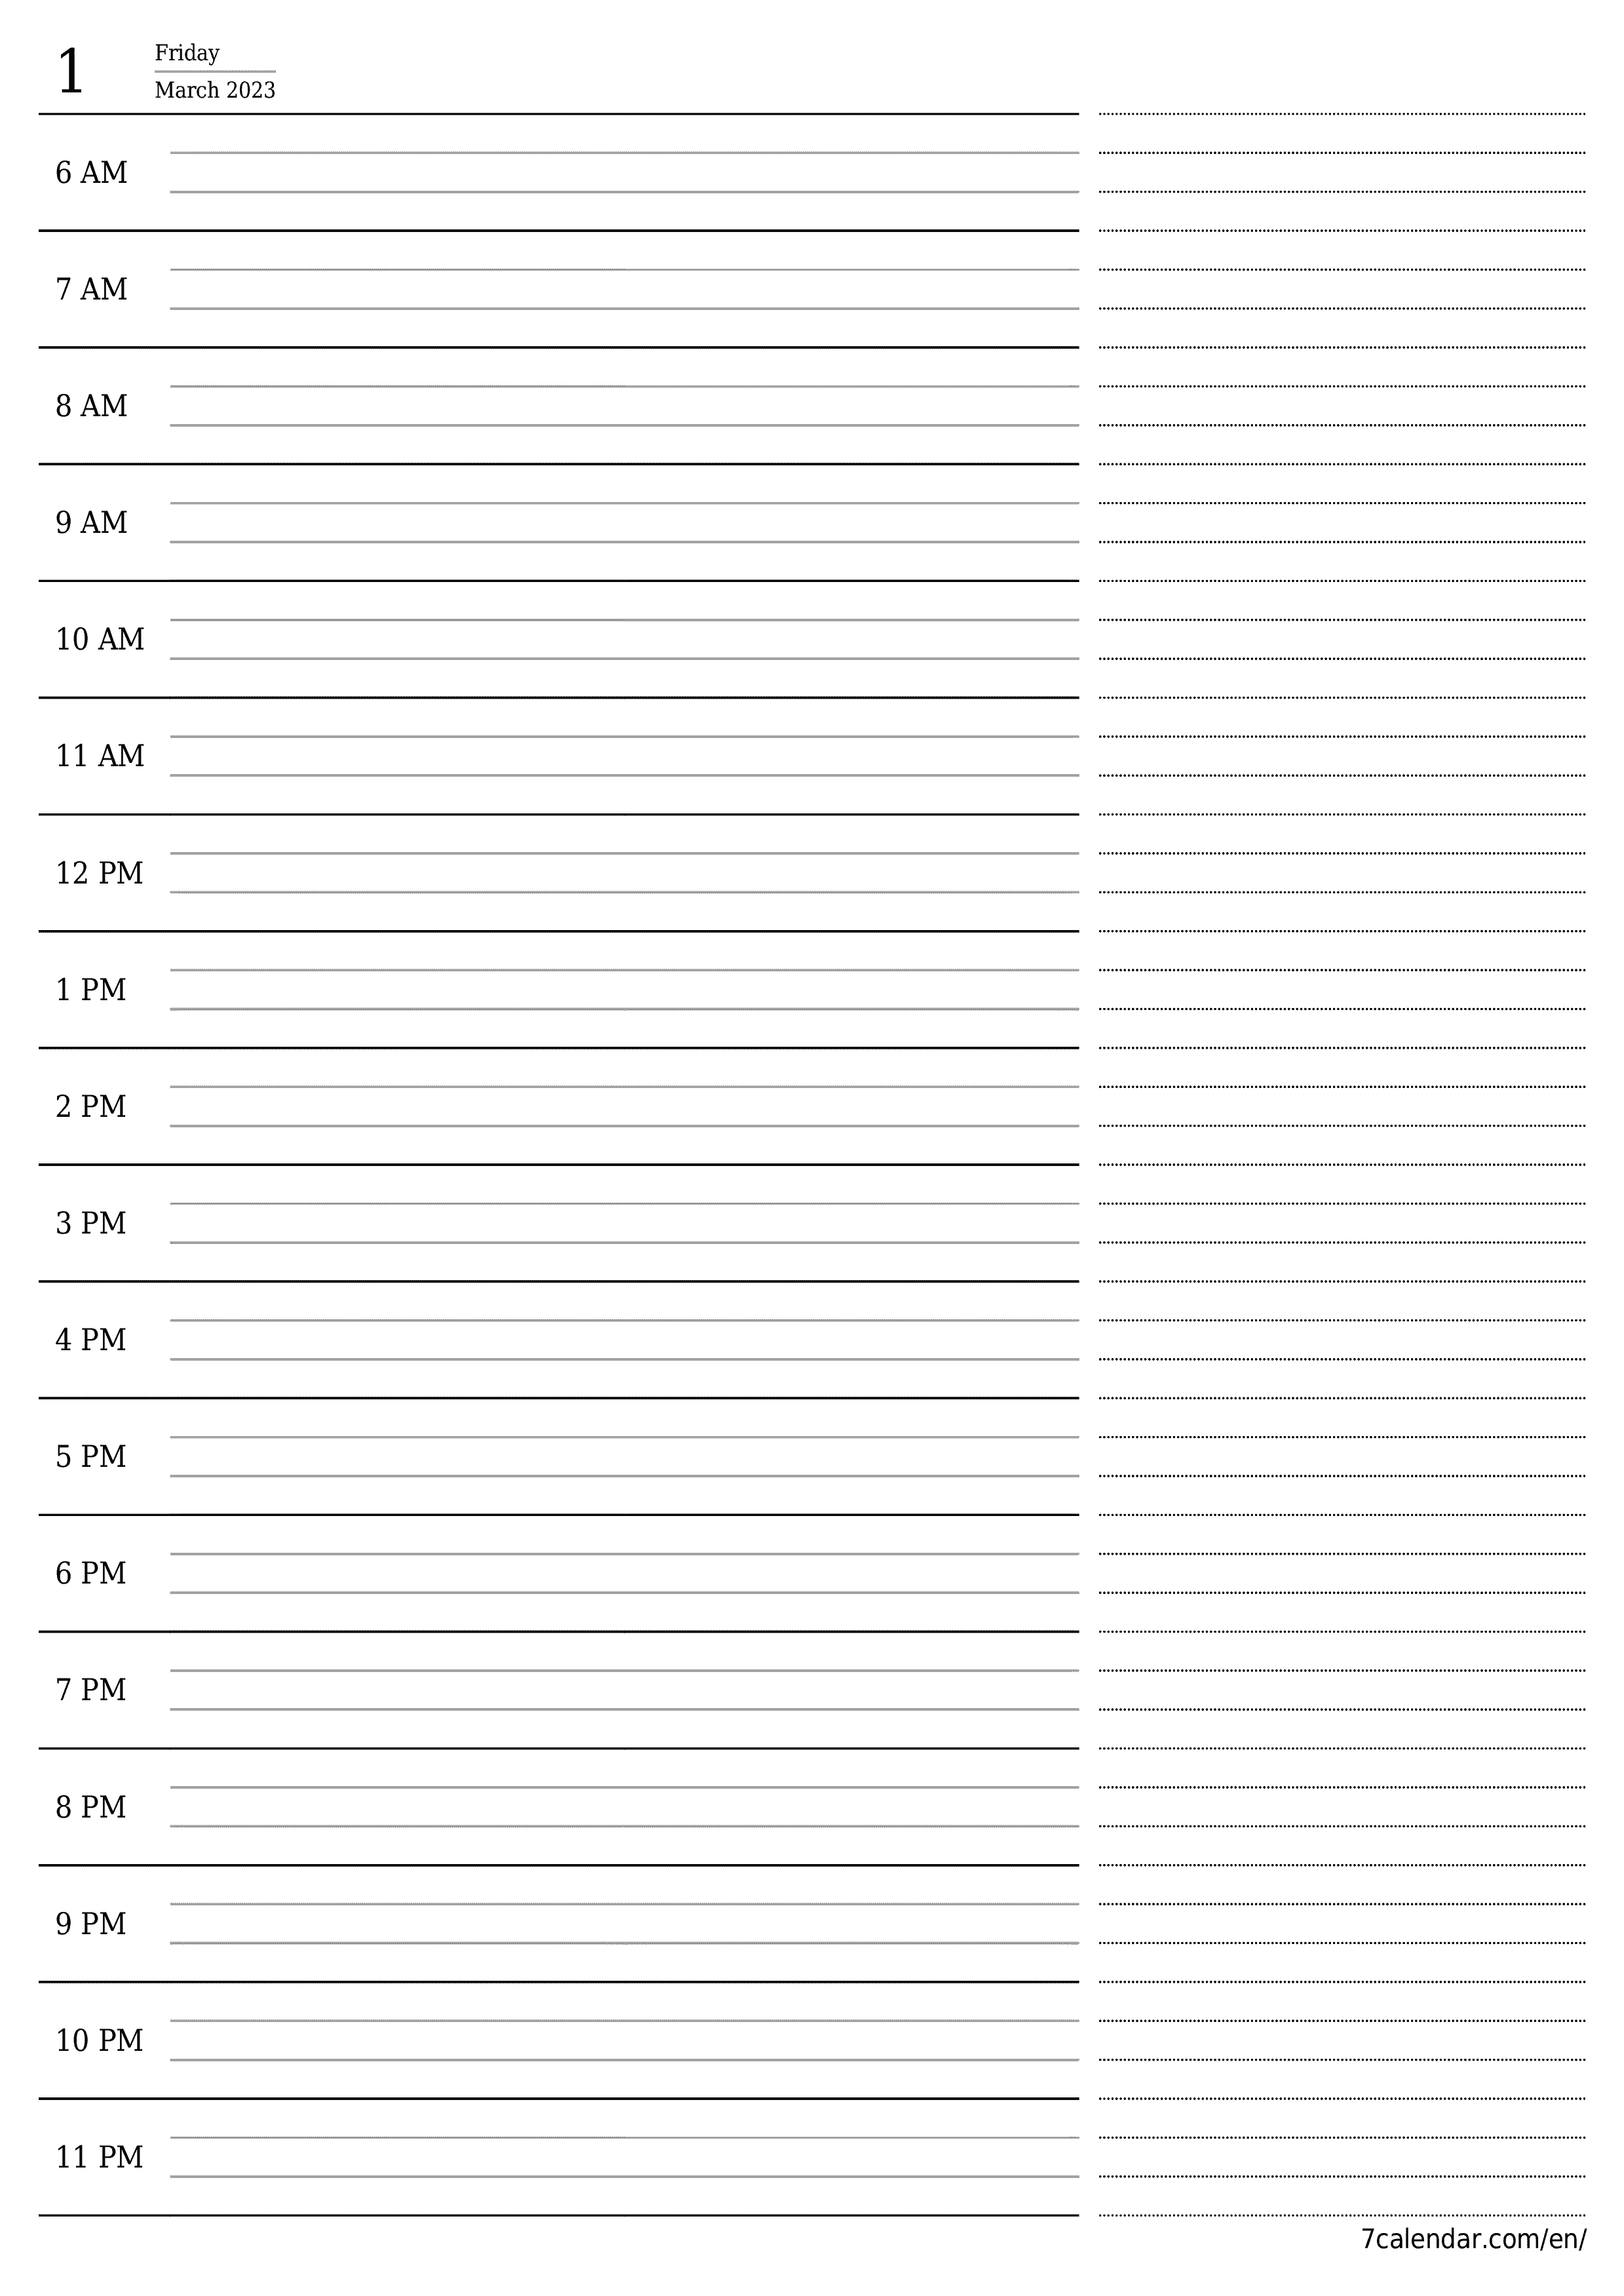 Blank daily calendar planner for day March 2023 with notes, save and print to PDF PNG English - 7calendar.com